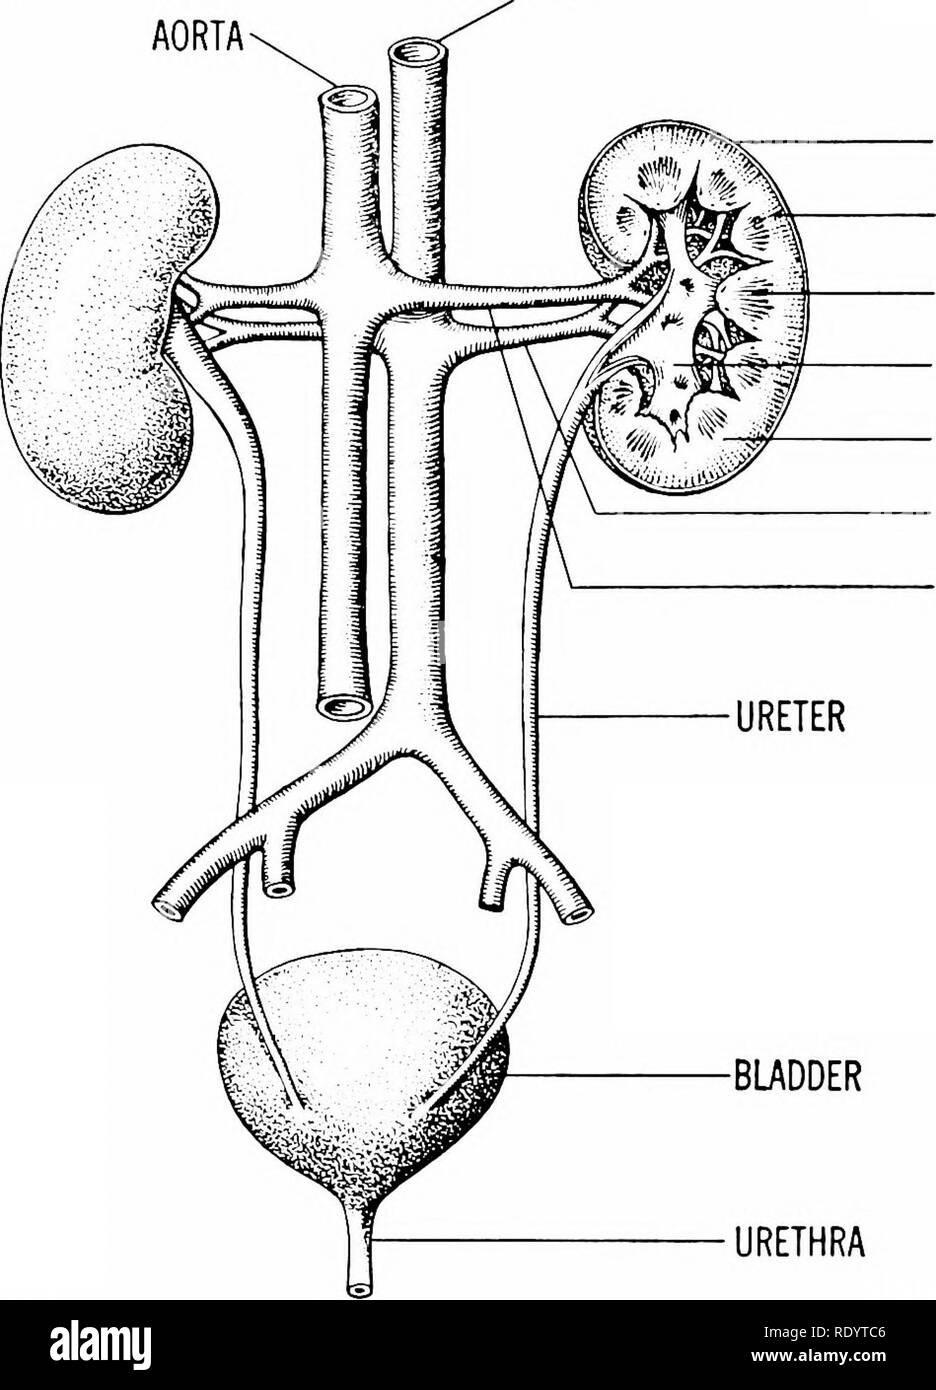 . Principles of modern biology. Biology. 370 - Multicellular Animals, Especially Man INF. VENA CAVA. TUNIC CORTEX PYRAMID PELVIC CHAMBER MEDULLA RENAL VEIN RENAL ARTERY Fig. 20-1. Diagram of the human urinary system, posterior view. becomes less and less adequate as the mass of an animal increases. In flatworms, such as Planaria, the body encompasses a consider- able mass of mesodermal tissues, intervening between the ectoderm and endoderm. Such an increase in the mass of the body requires the development of specialized excretory organs, and planarians possess a large num- ber of flame cells ( Stock Photo